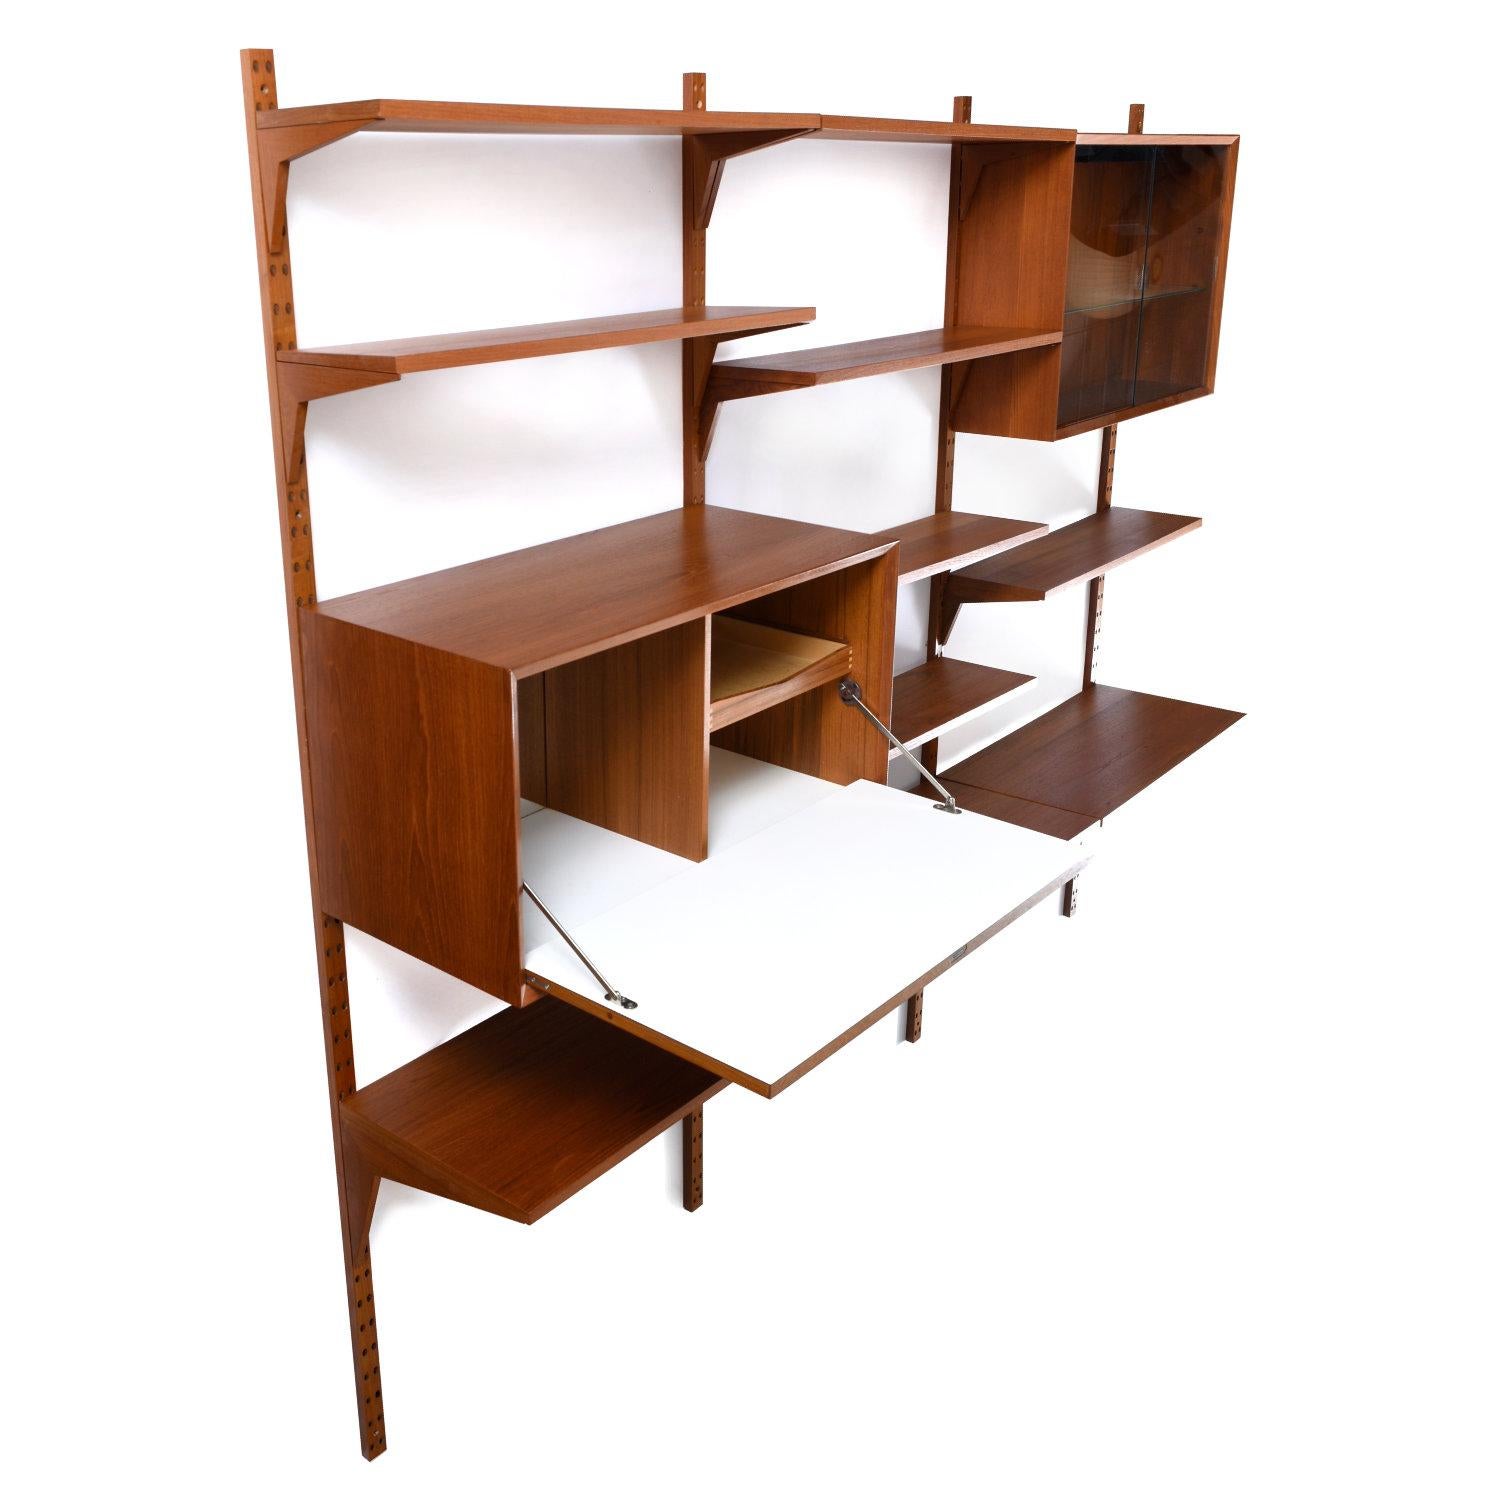 Vintage 1960s Danish teak CADO wall shelving system with modular components. The ingenious design allows one to easily customize a shelving and storage display. Mount the four support poles to the wall. All of the shelves and cabinets effortlessly